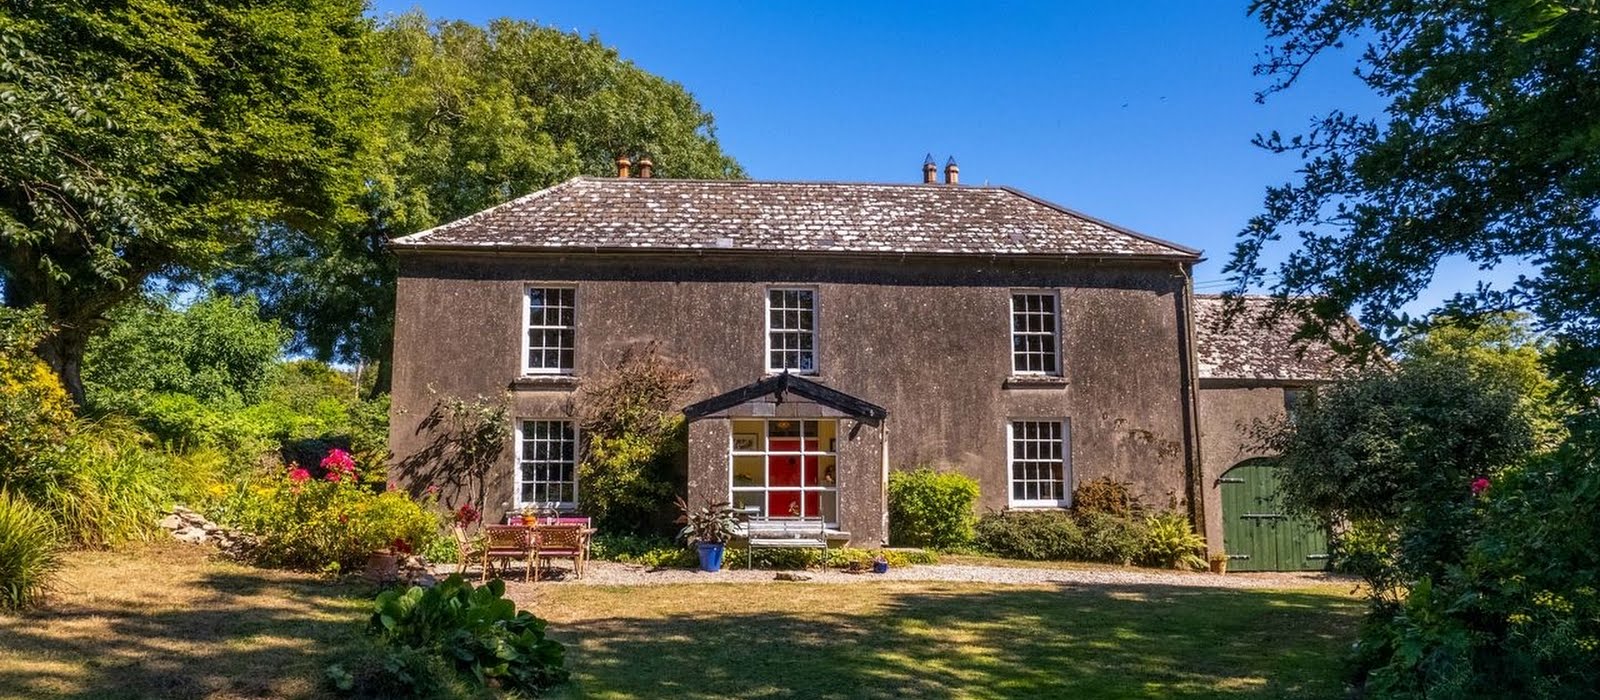 This dreamy East Cork period home is on the market for €775,000